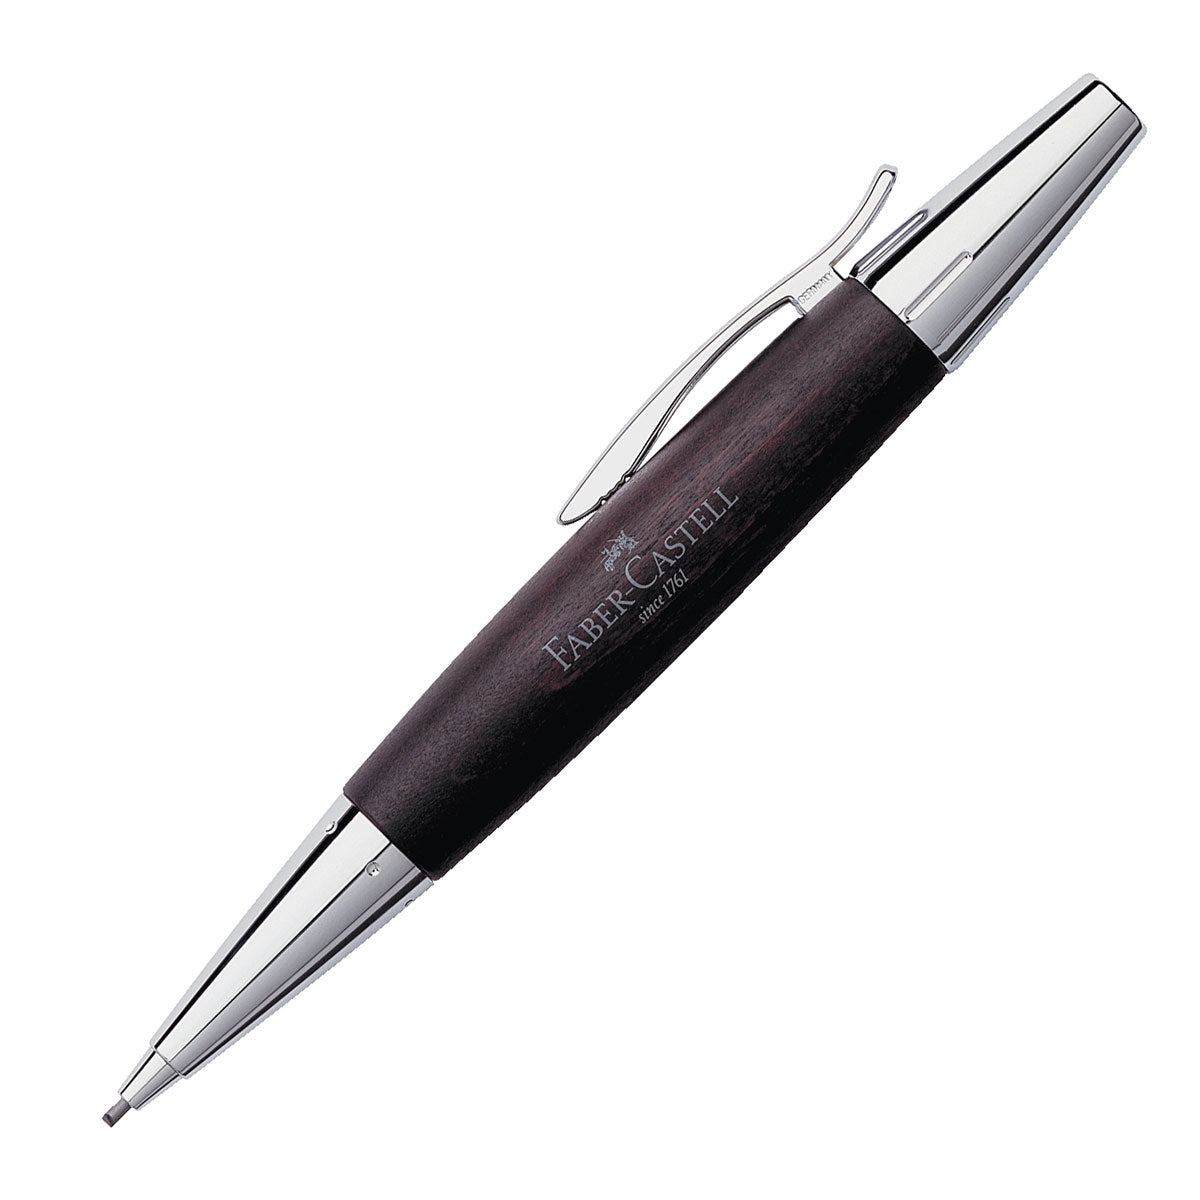 Faber-Castell e-motion 138381 Pencil, Dark Brown Pearwood